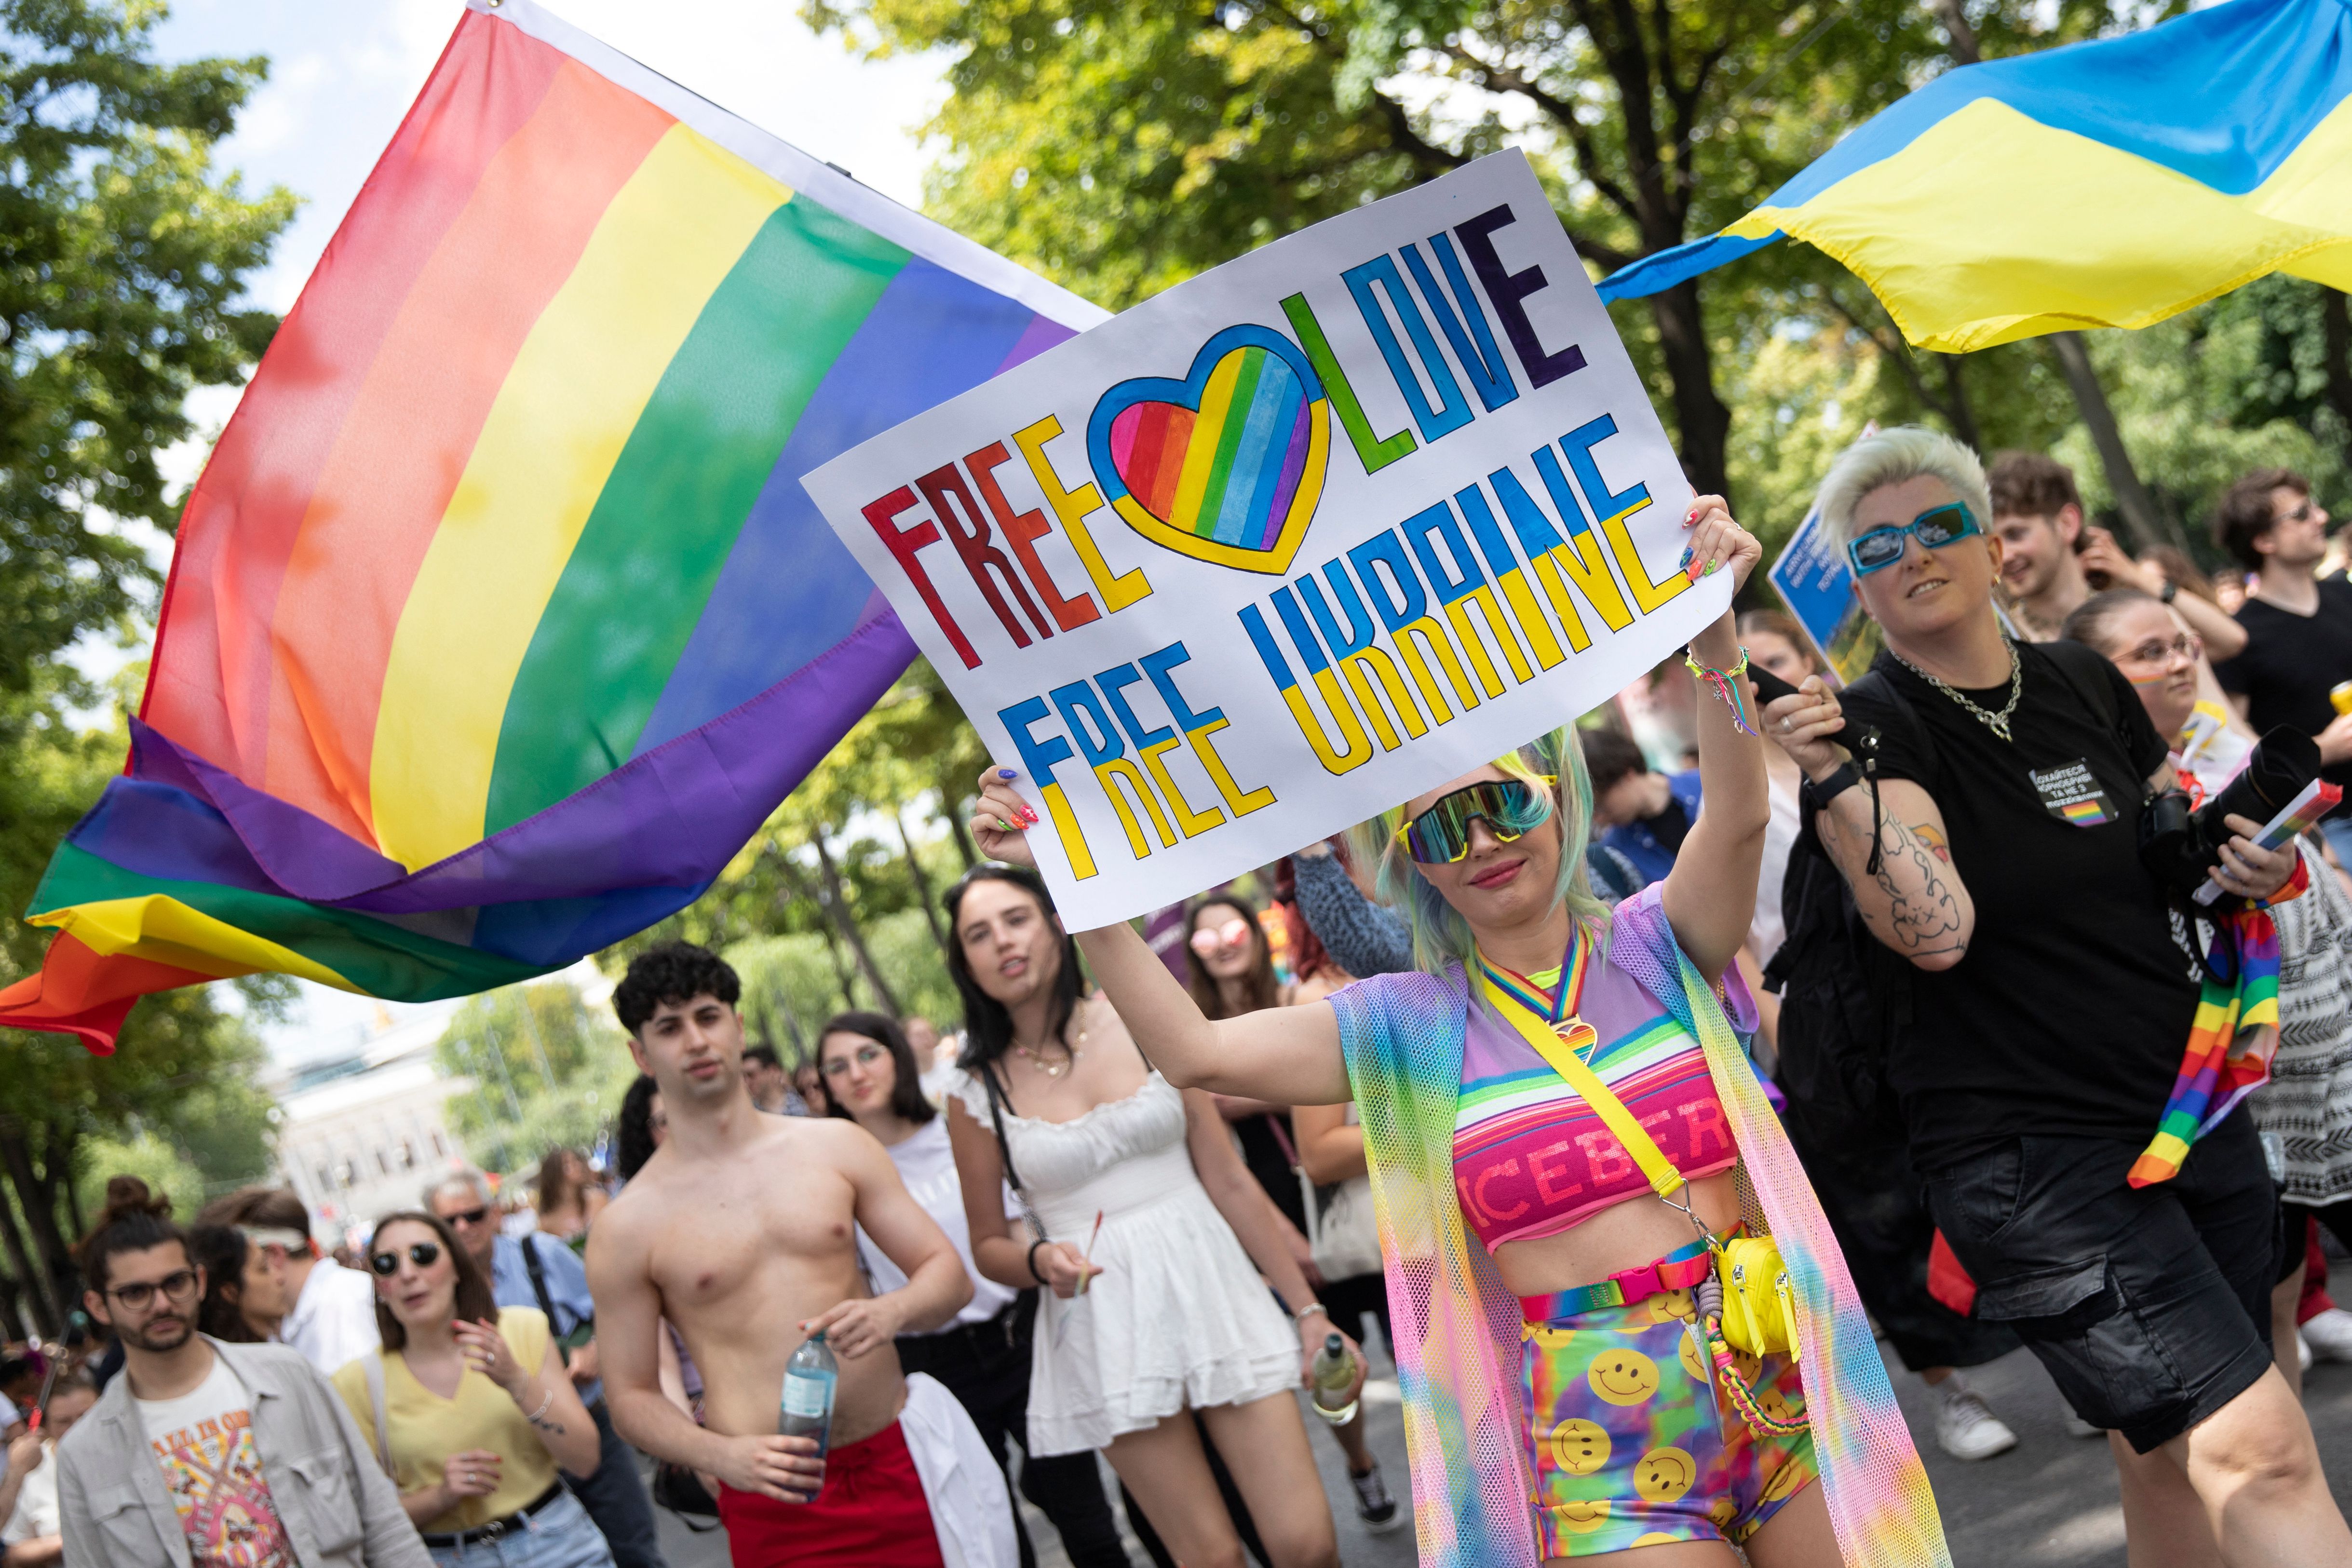 The Pride parade went ahead as planned on Saturday June 17. Photo: ALEX HALADA/AFP via Getty Images